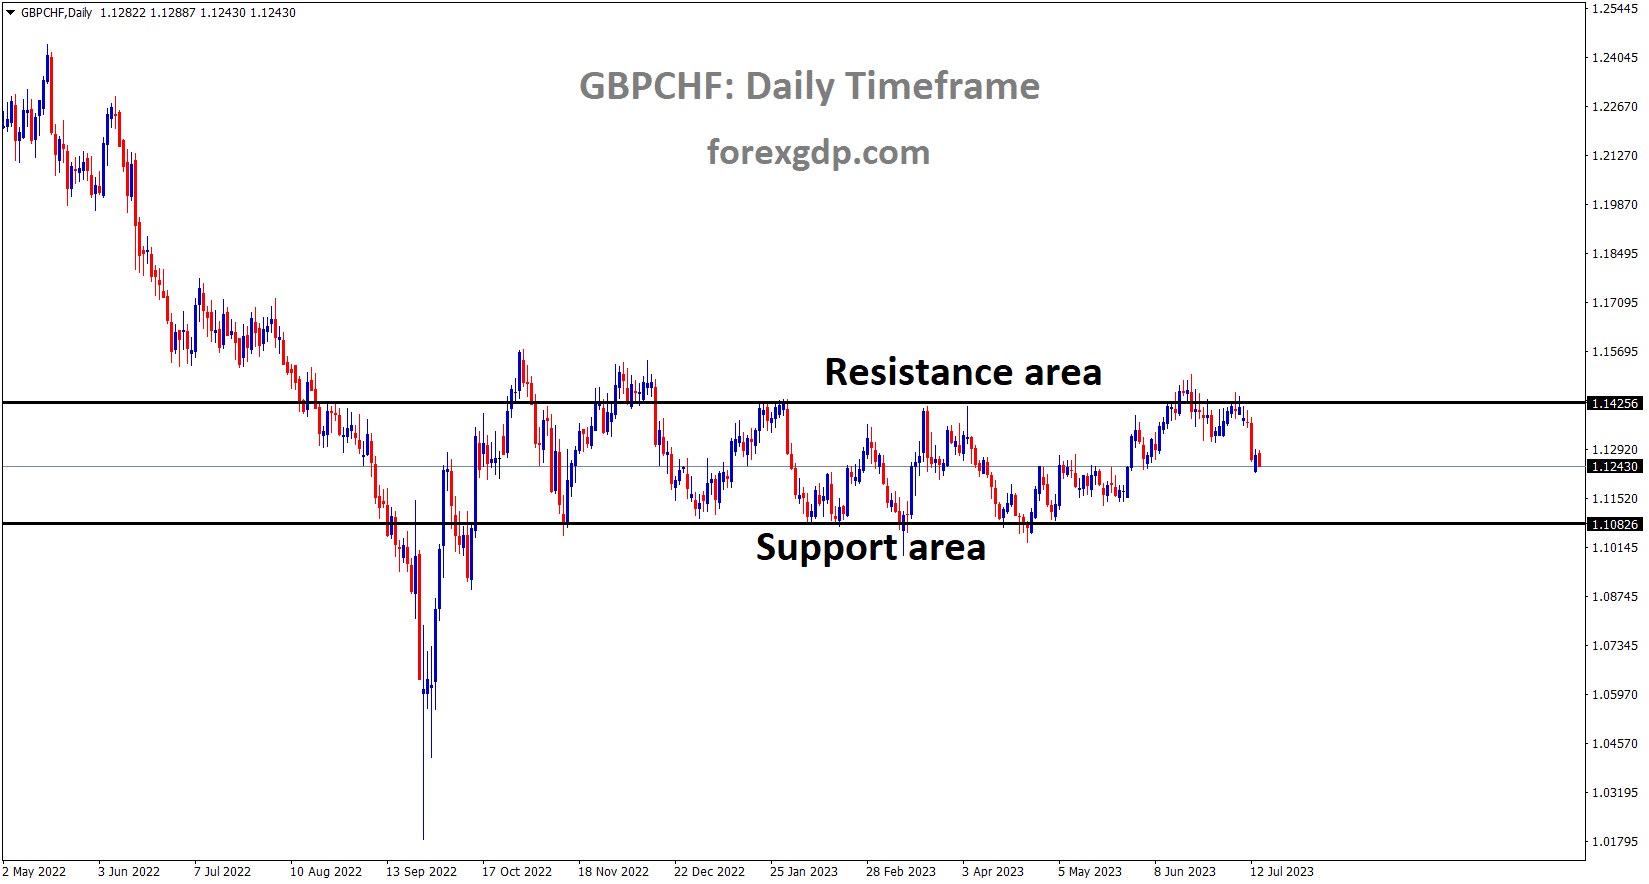 GBPCHF is moving in the Box pattern and the market has fallen from the resistance area of the pattern